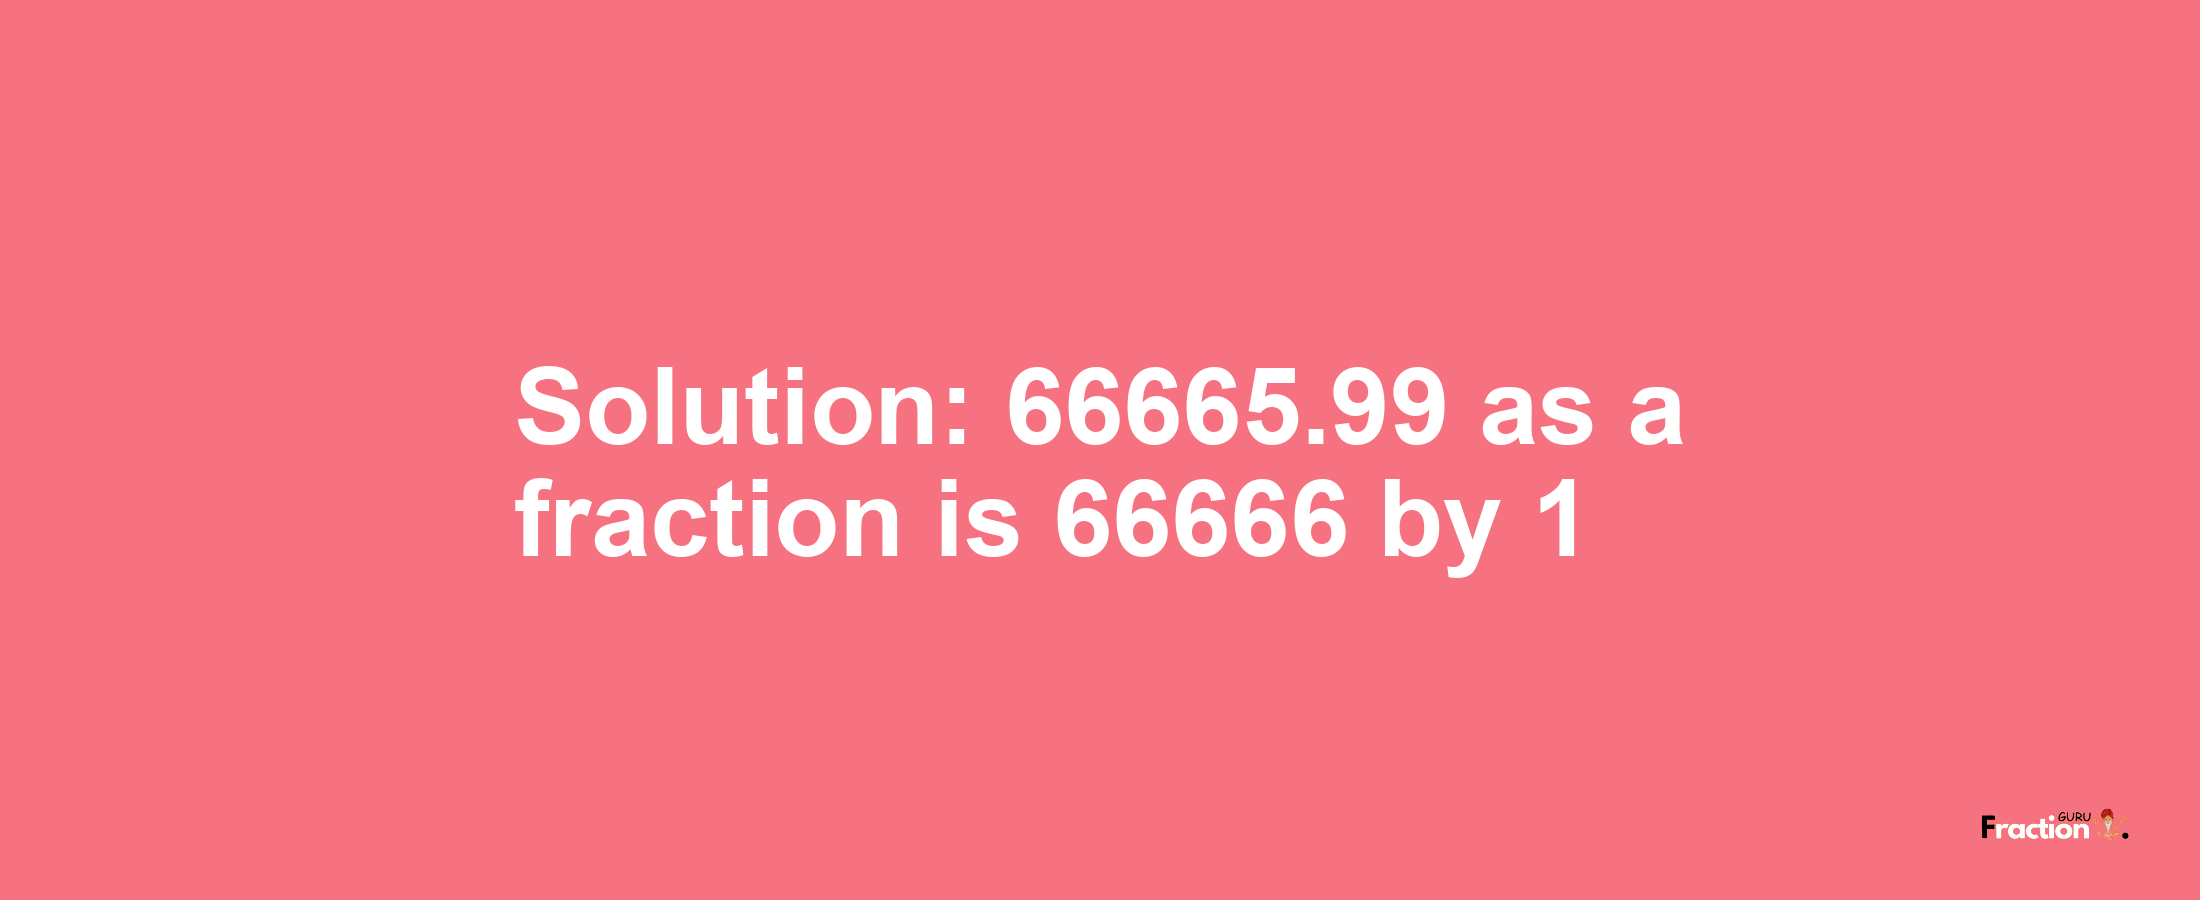 Solution:66665.99 as a fraction is 66666/1